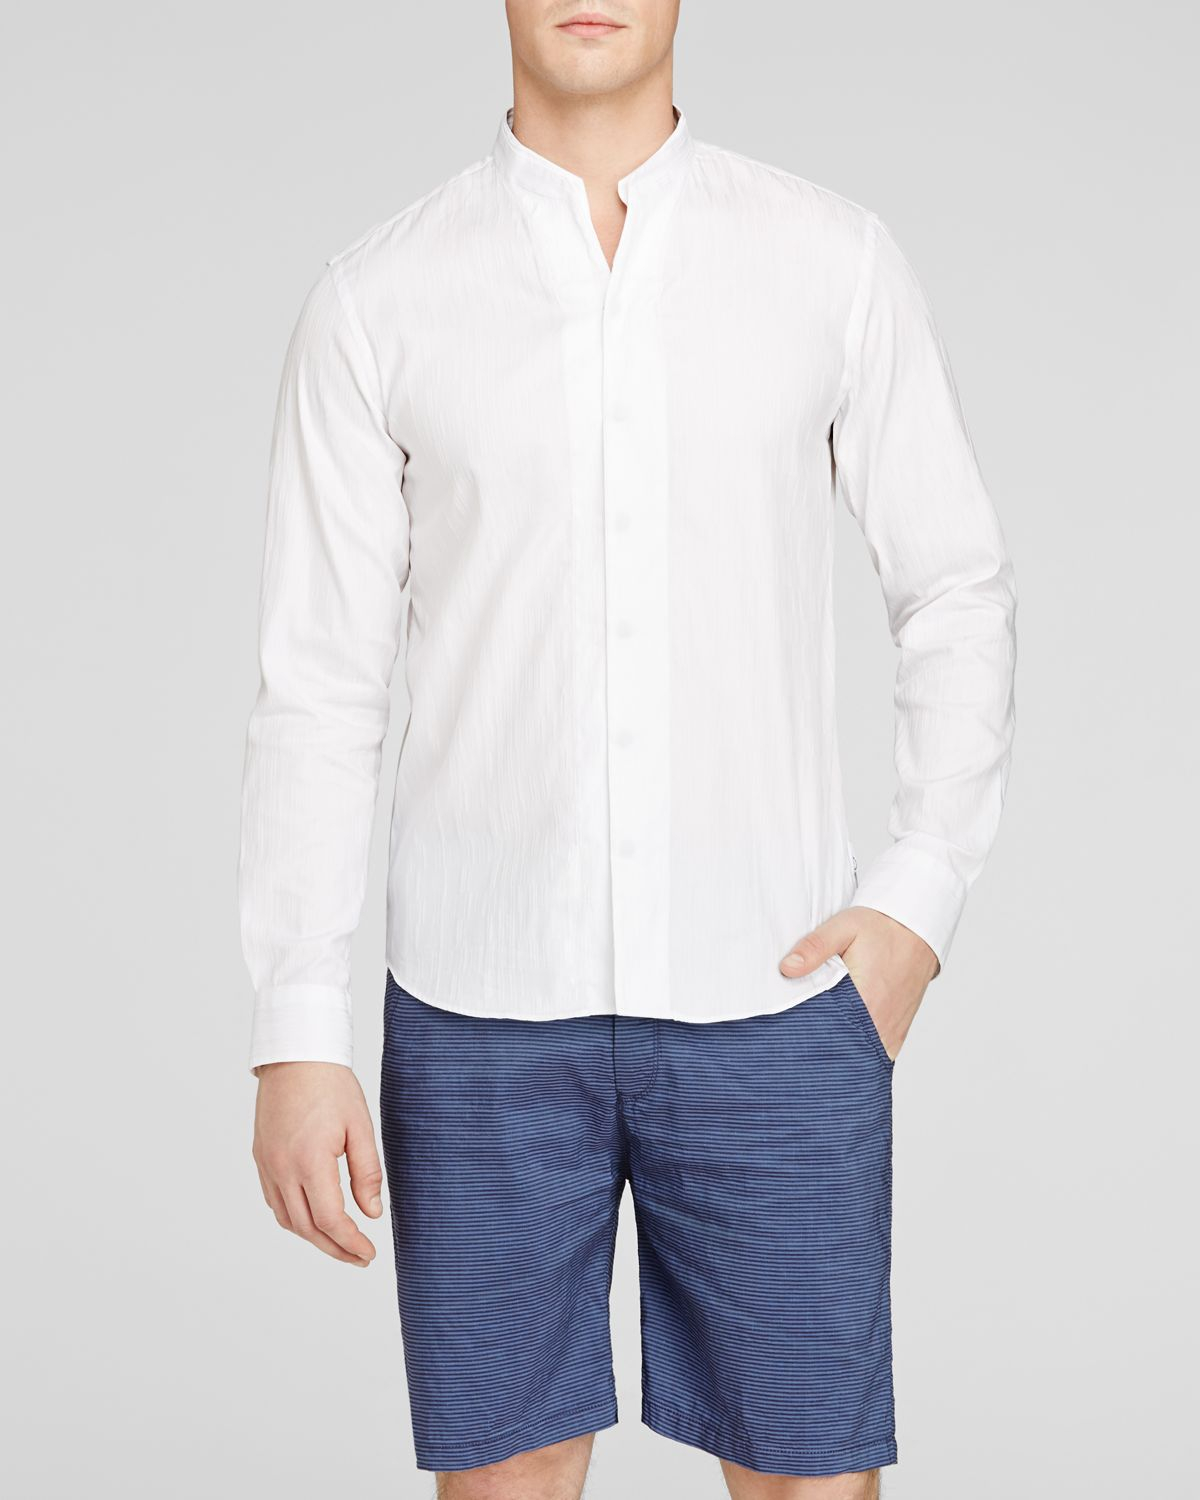 Lyst - Armani Stand Collar Button Down Shirt - Classic Fit in White for Men